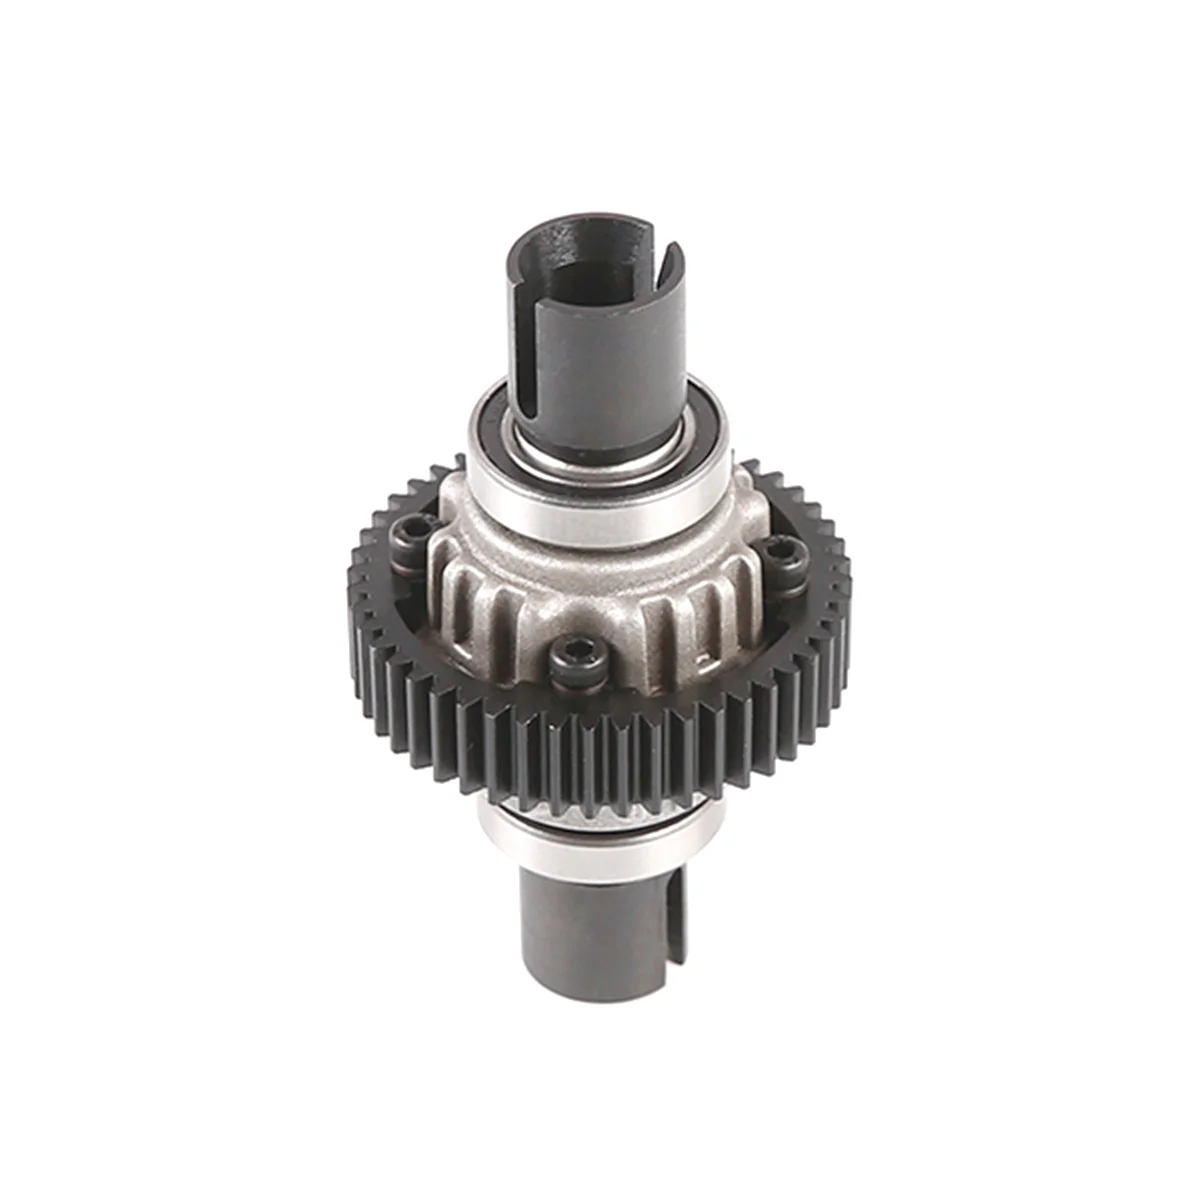 

Differential Diff Gear Set Fit for 1/5 HPI ROFUN BAHA ROVAN KM BAJA 5B 5T 5SC Rc Car Toys Parts,Upgraded Accessories